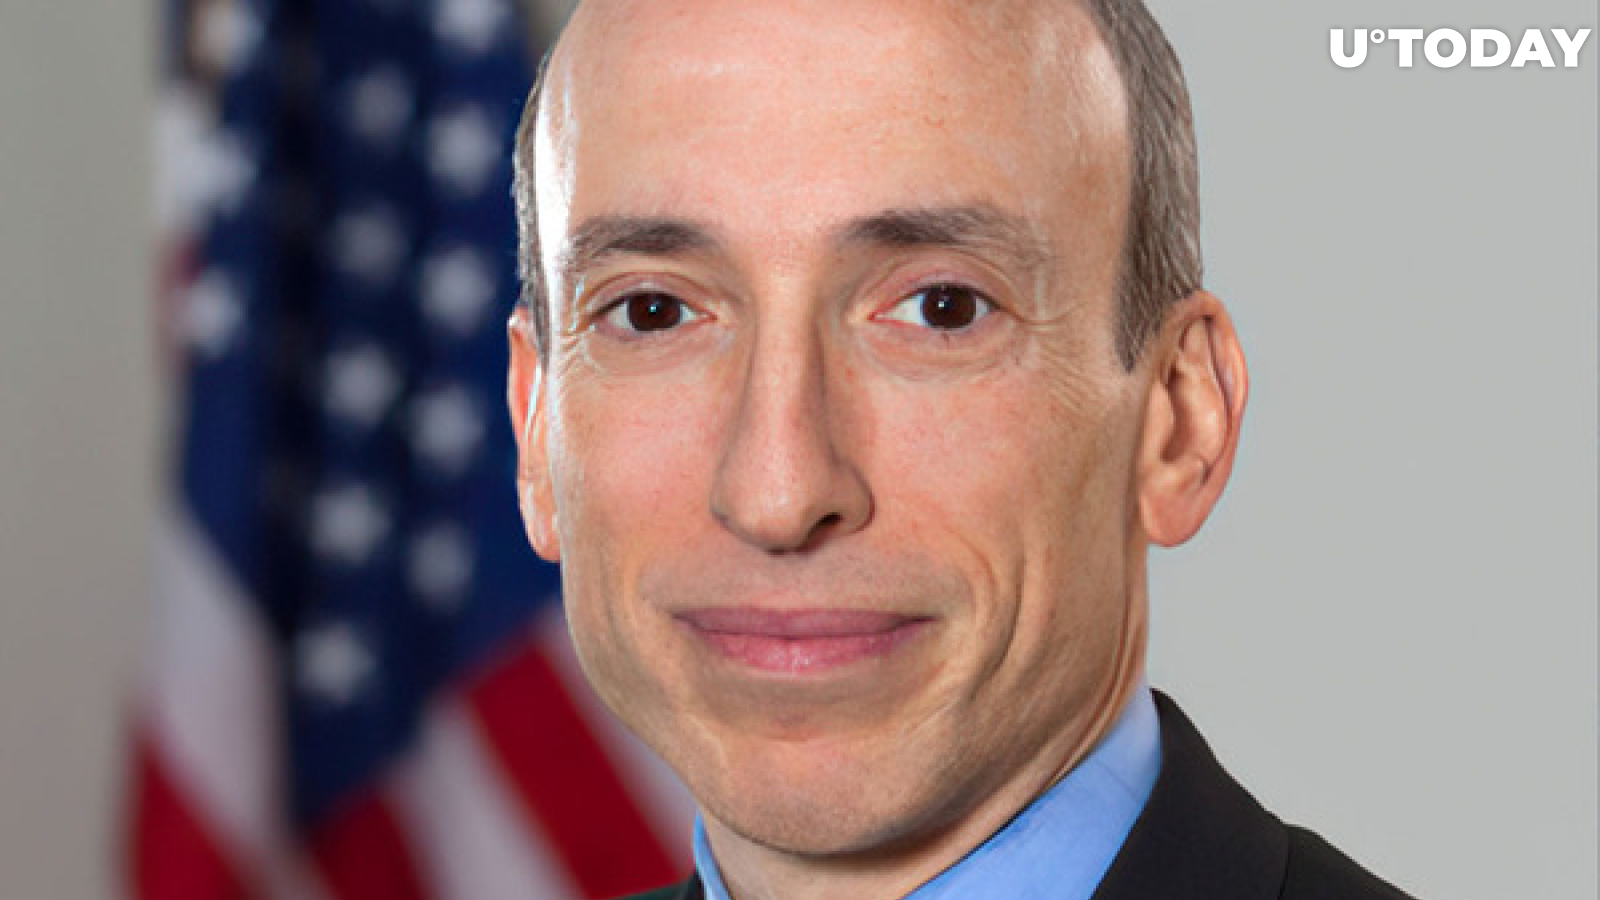 SEC Chair Gensler Says Crypto Investors Need Greater Protection